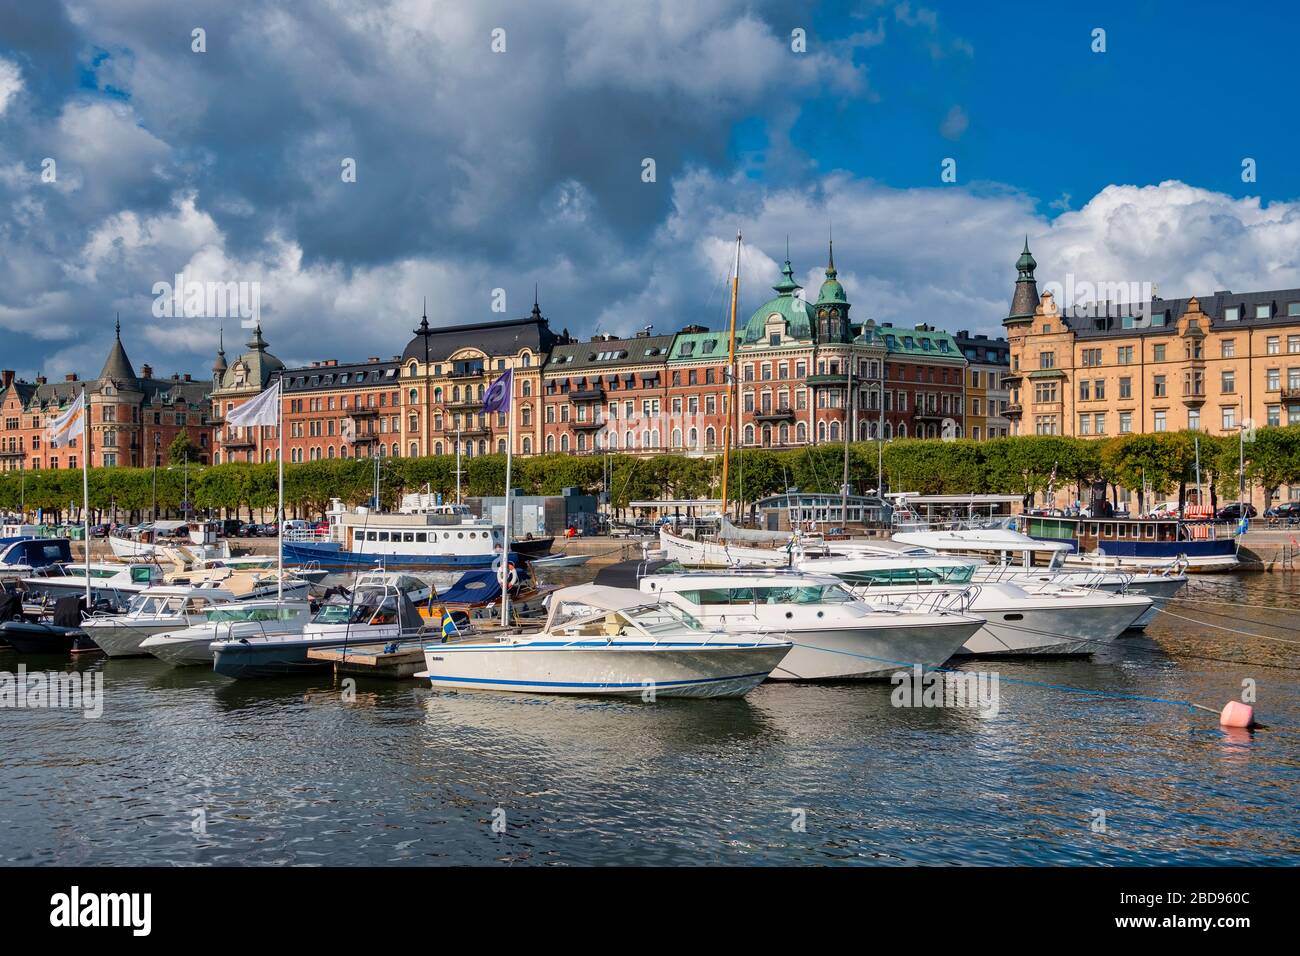 Boats moored in an harbor in Stockholm, Sweden, Europe Stock Photo